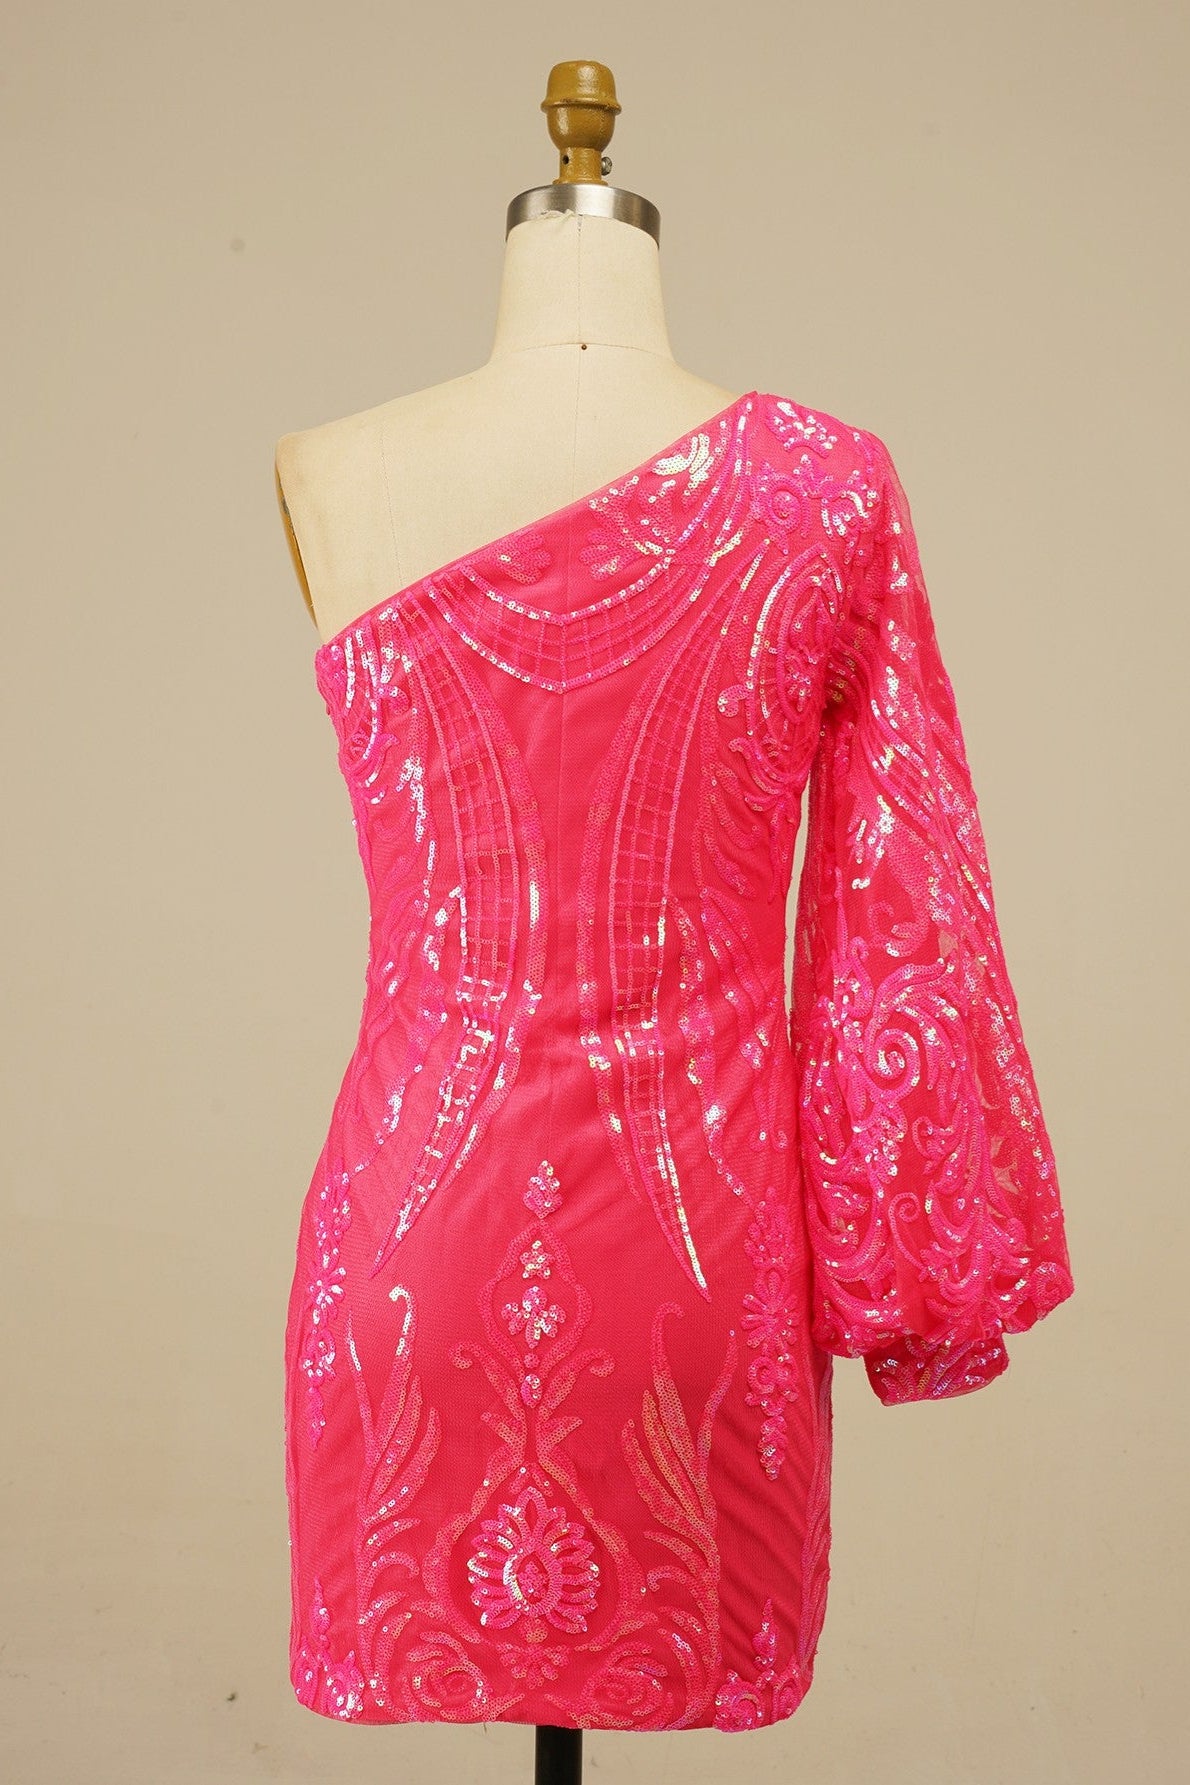 Hot Pink One Shoulder Long Sleeve Sequins-Embroidered Homecoming Dress